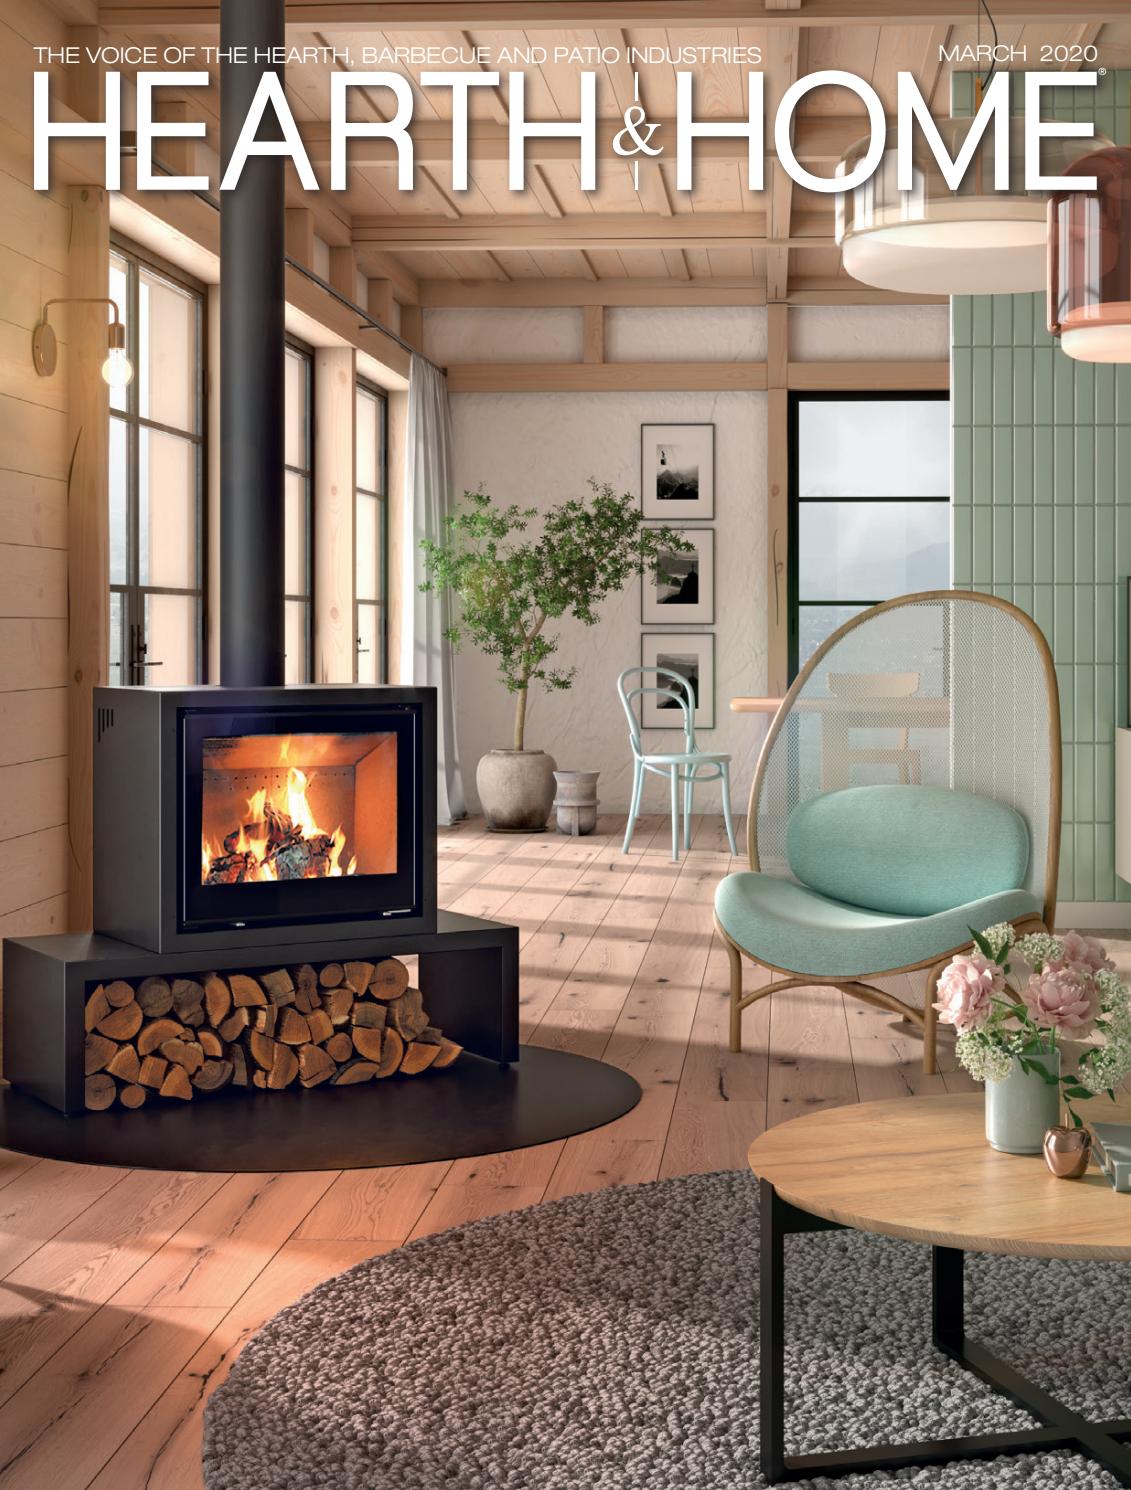 Astria Fireplace Unique Hearth & Home Magazine 2020 March issue by Hearth & Home